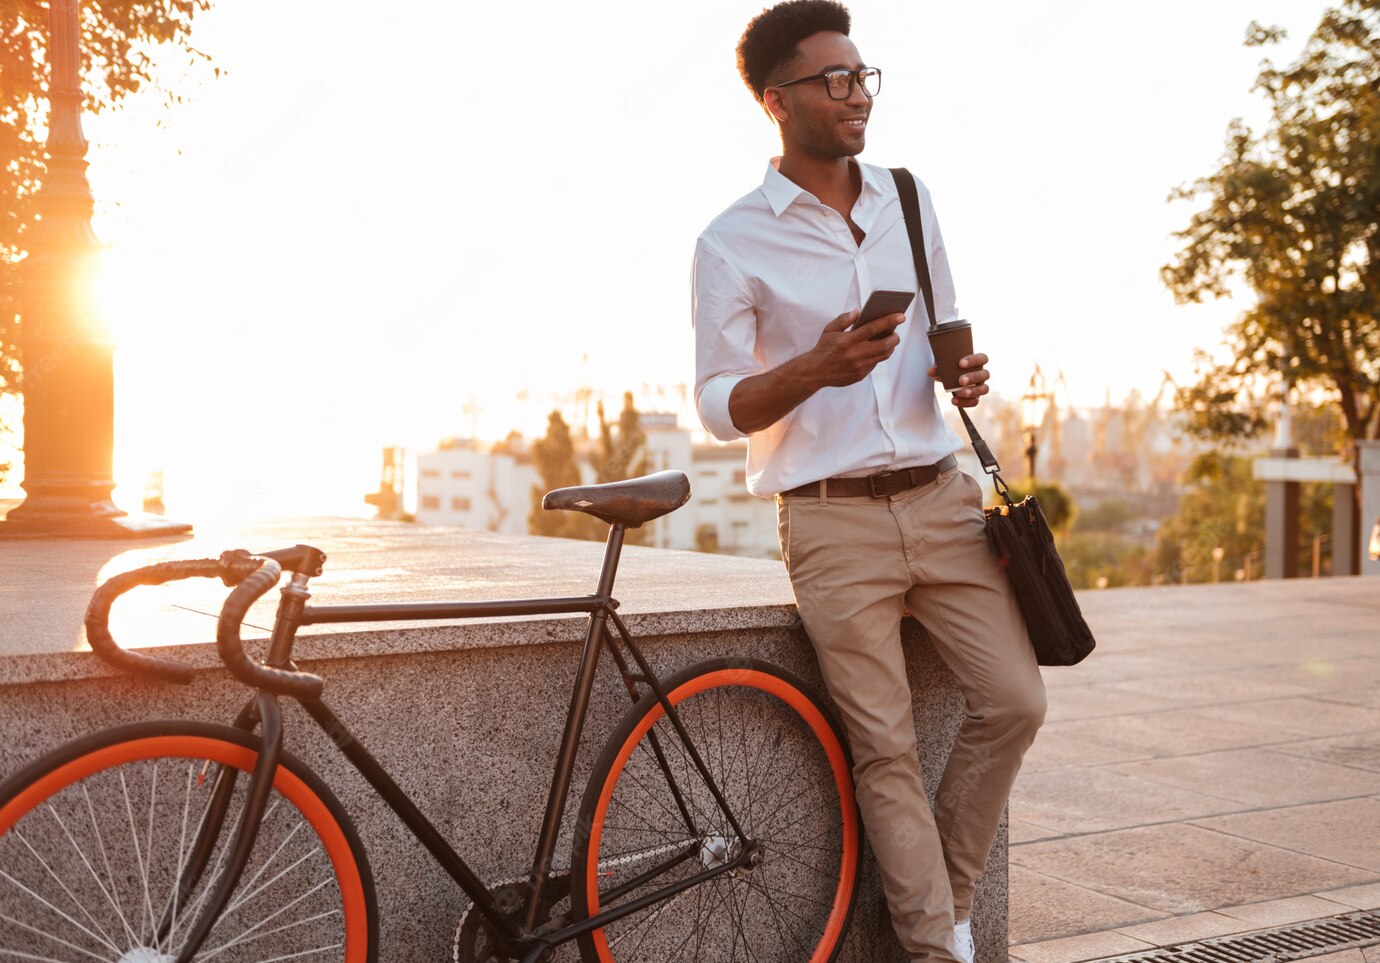 African Man Early Morning Standing Near Bicycle 171337 12955